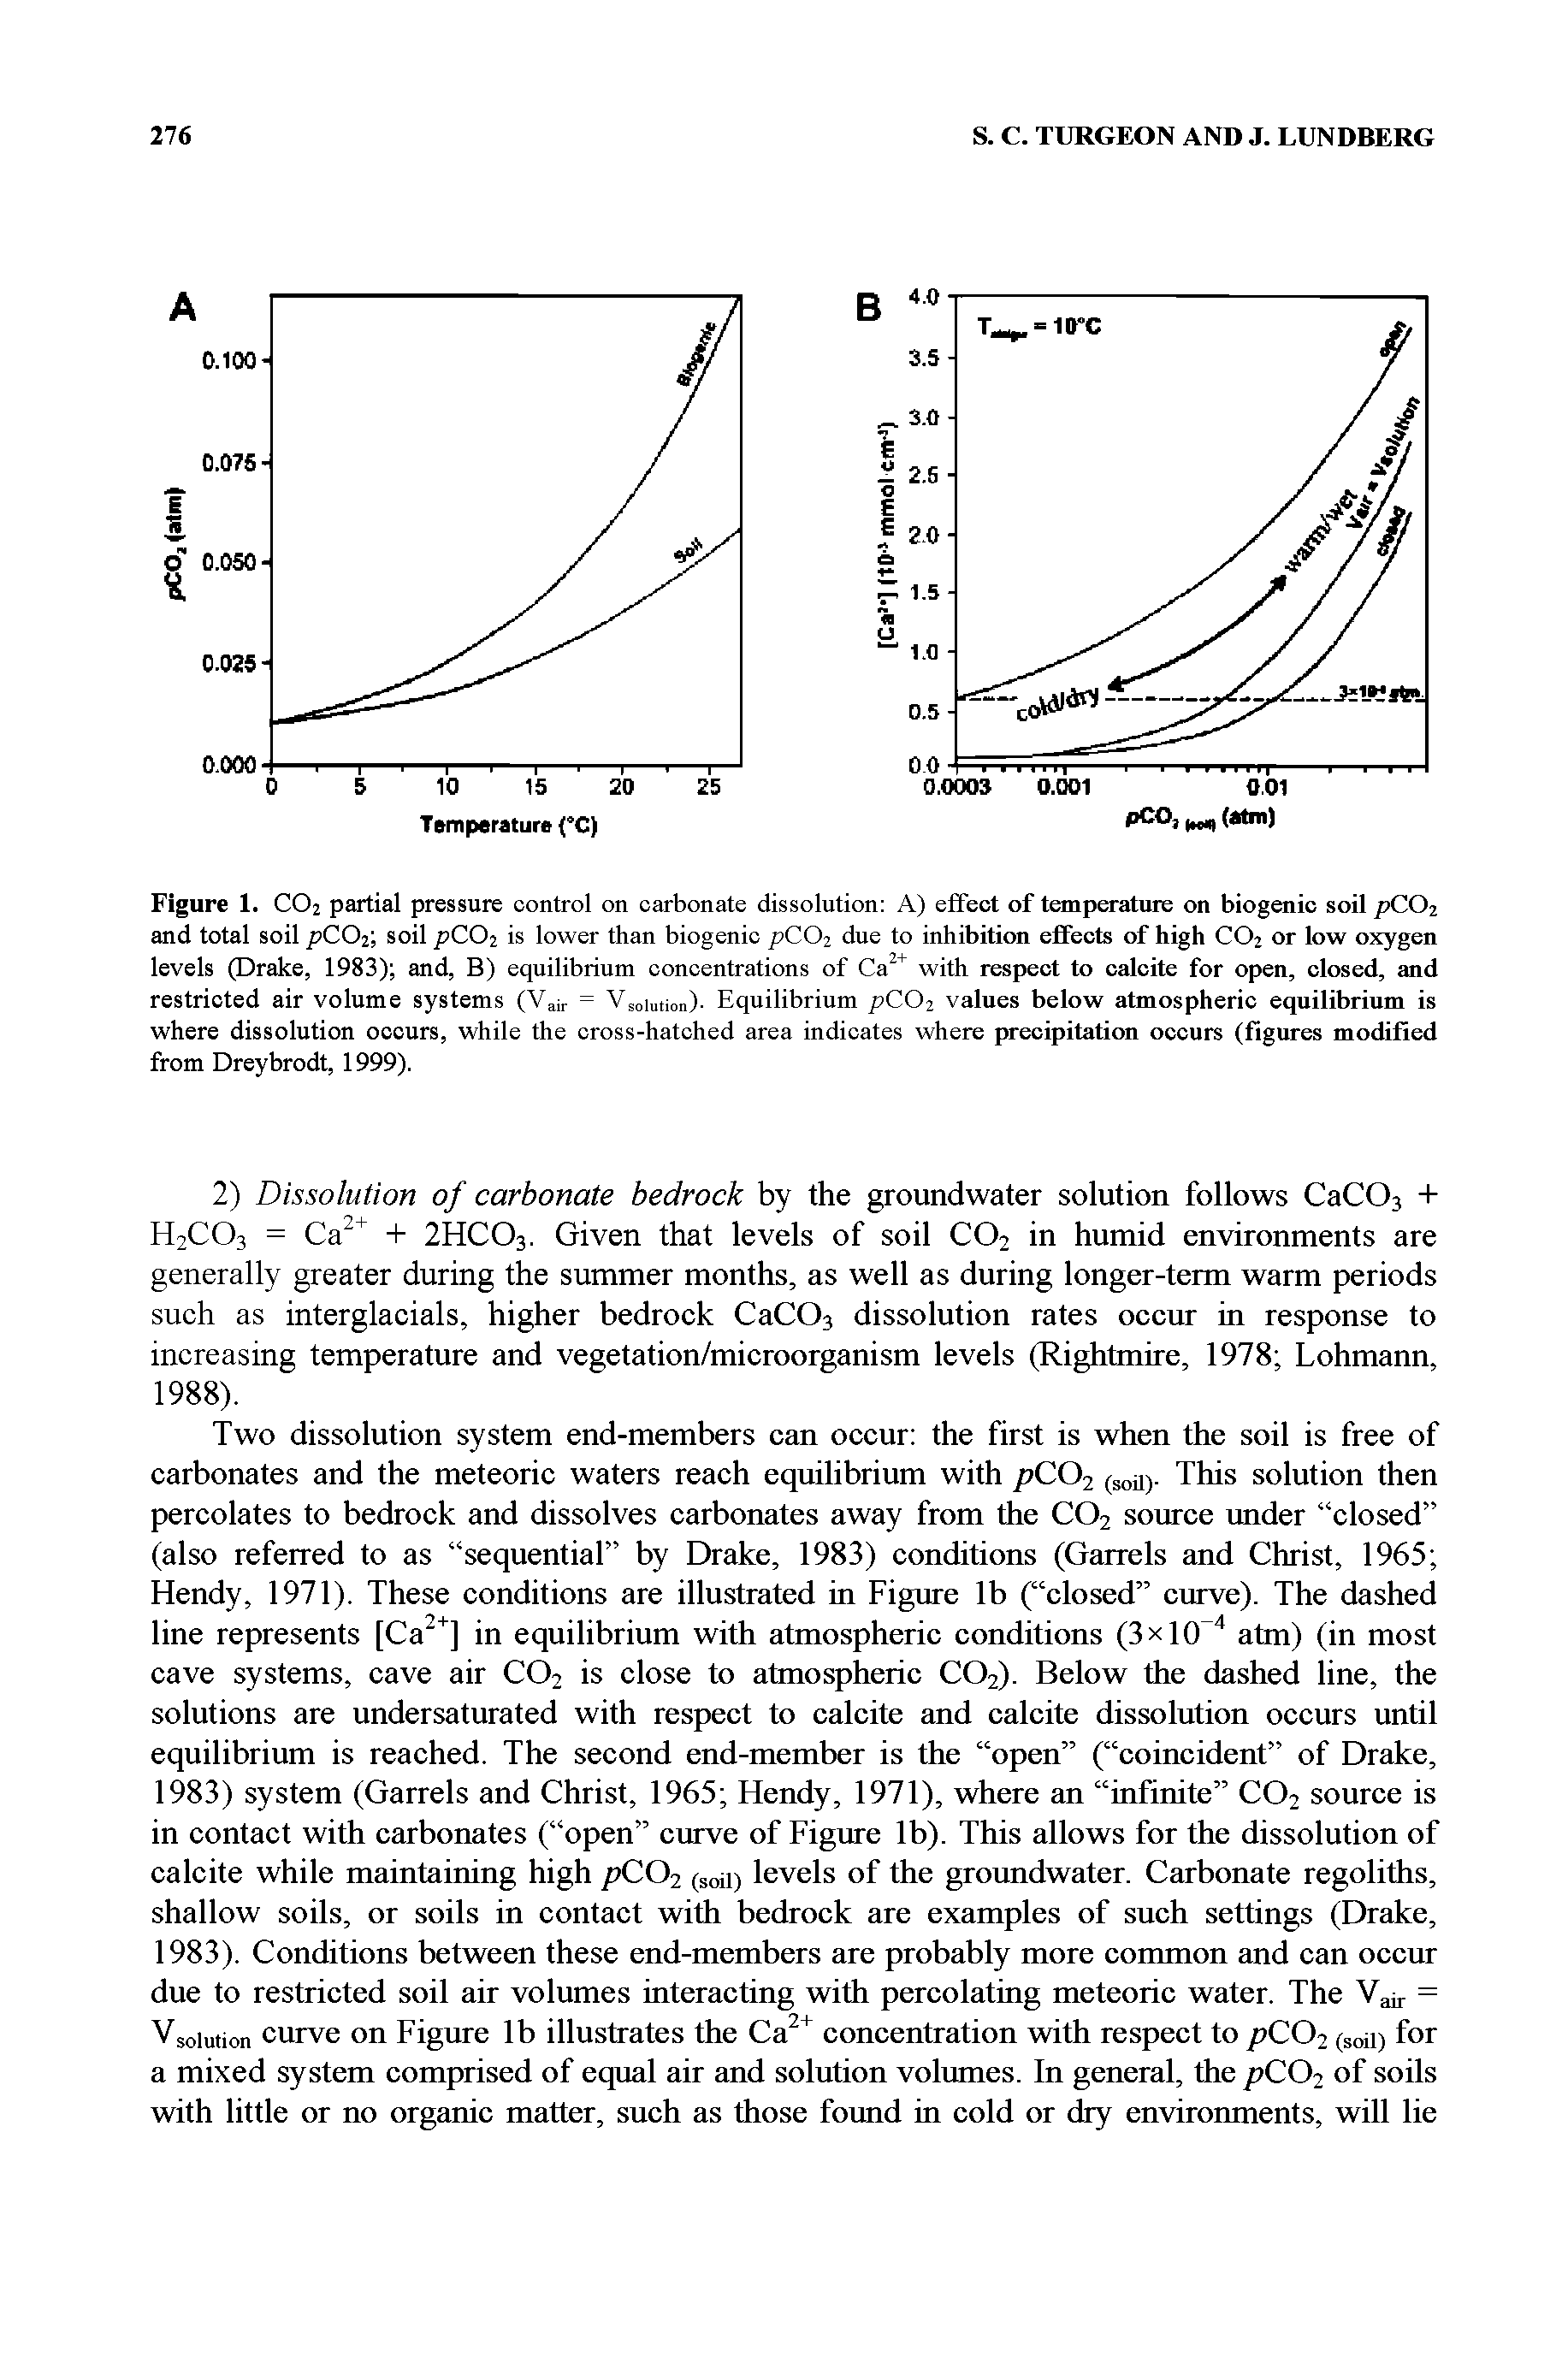 Figure 1. CO2 partial pressure control on carbonate dissolution A) effect of temperature on biogenic soil pCOz and total soil pCOz, soil pC-Oi is lower than biogenic pCOi due to inhibition effects of high CO2 or low oxygen levels (Drake, 1983) and, B) equilibrium concentrations of Ca with respect to calcite for open, closed, and restricted air volume systems Equilibrium pCOi values below atmospheric equilibrium is...